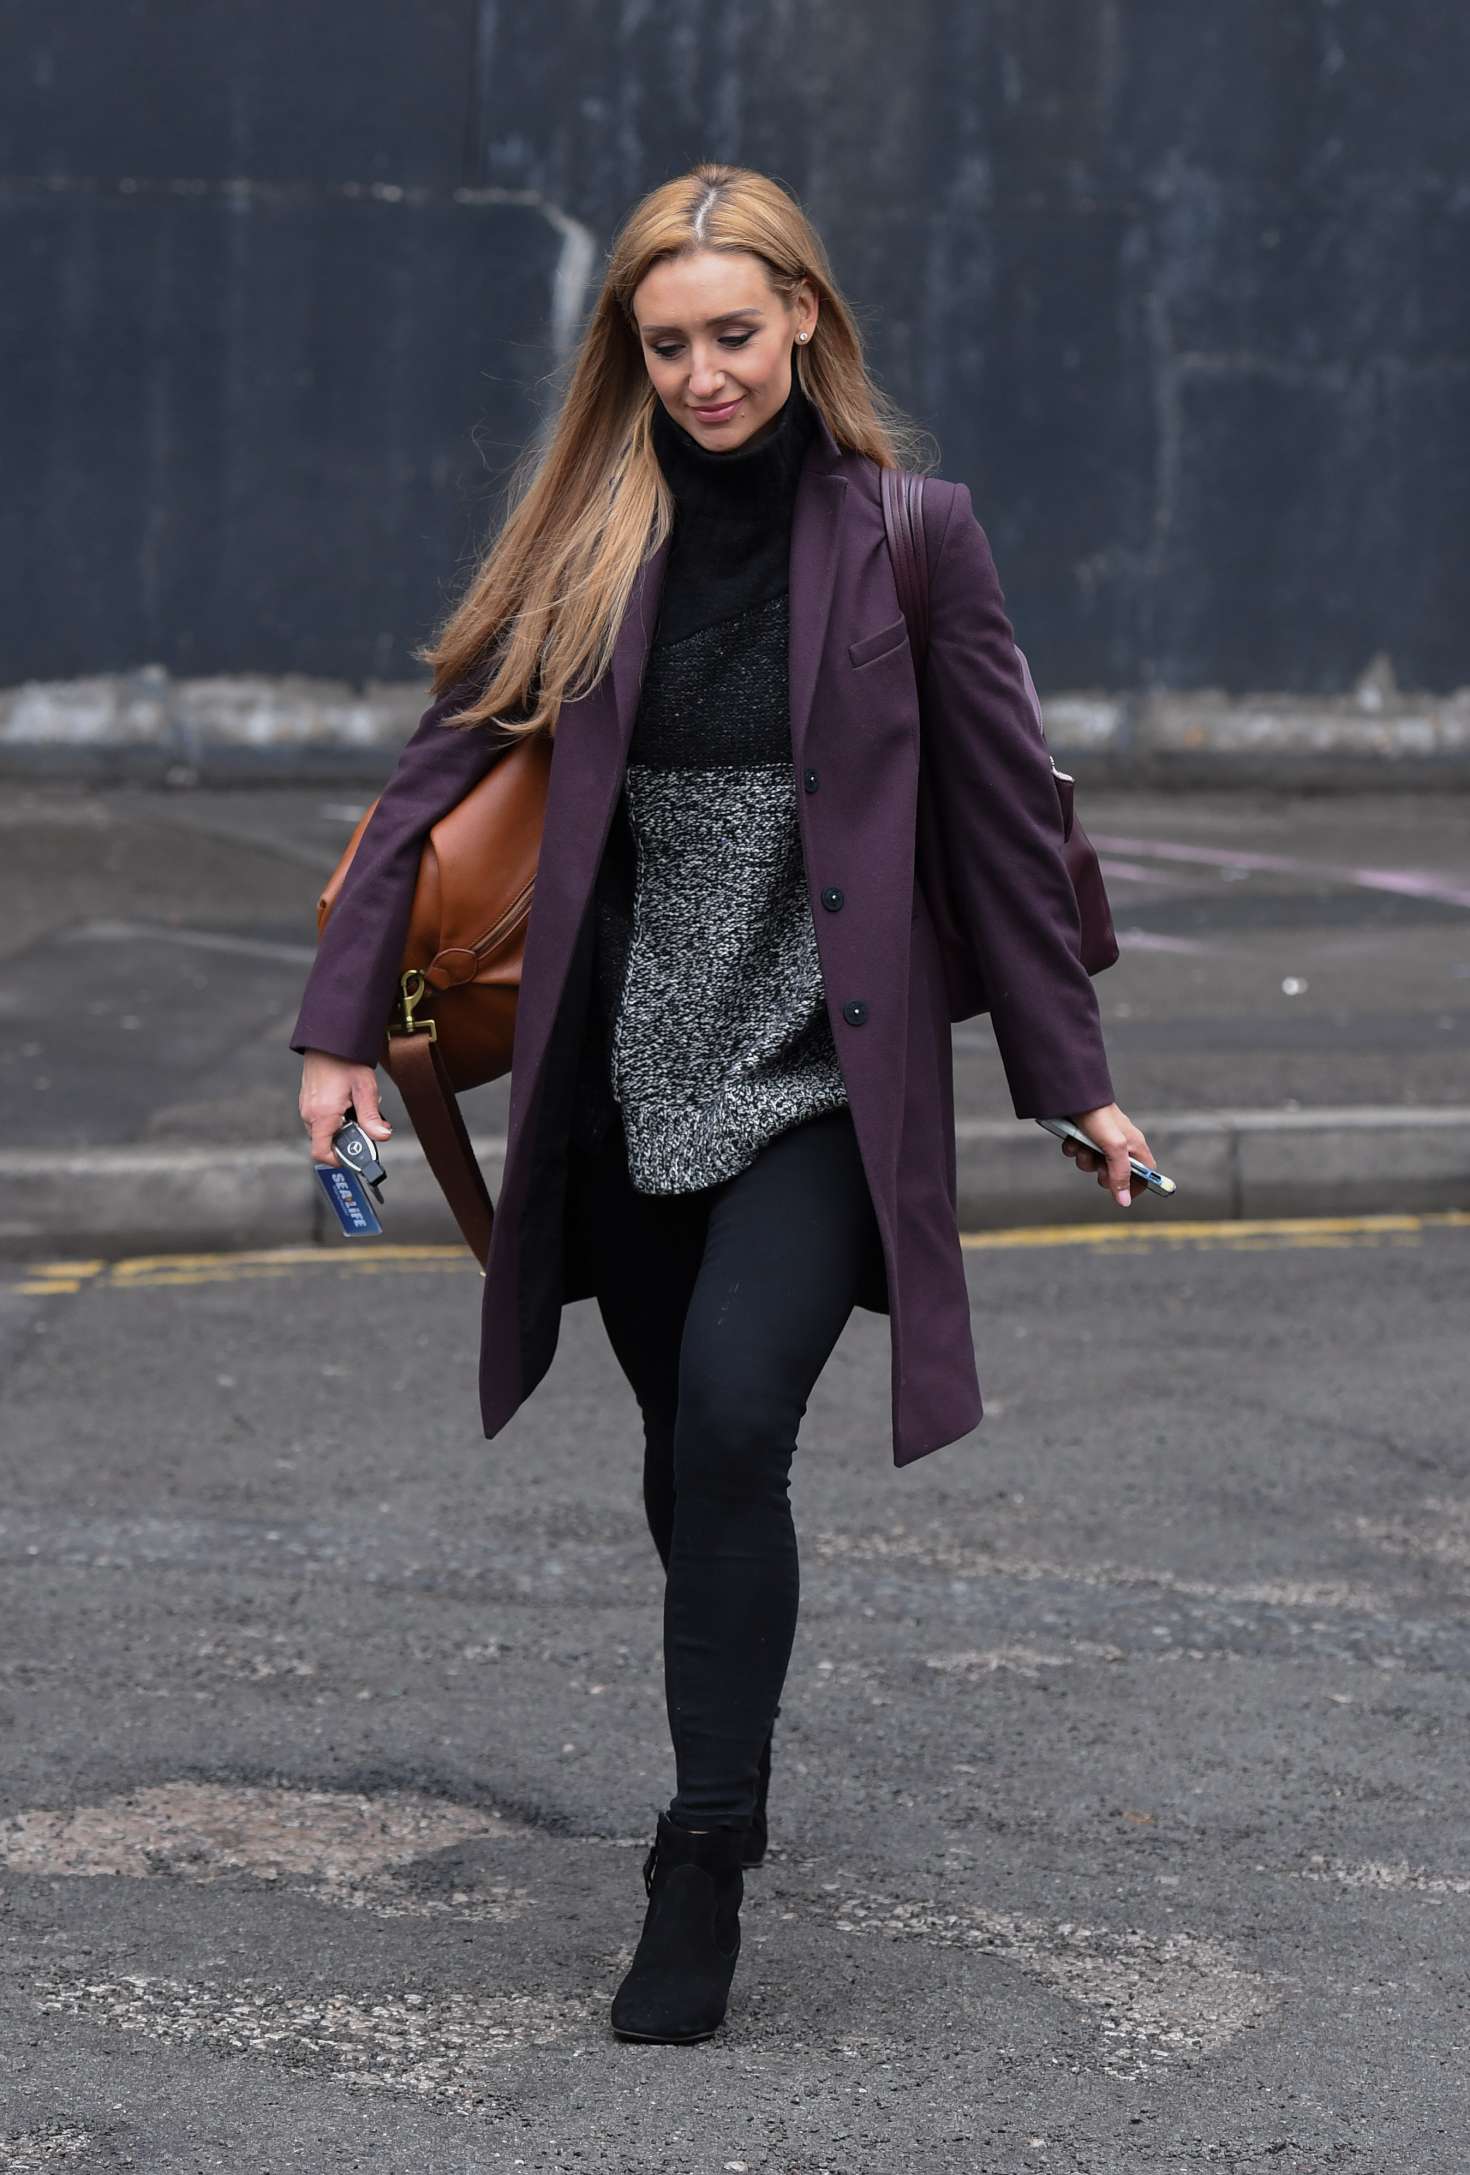 Catherine Tyldesley - Out in Manchester City1470 x 2175